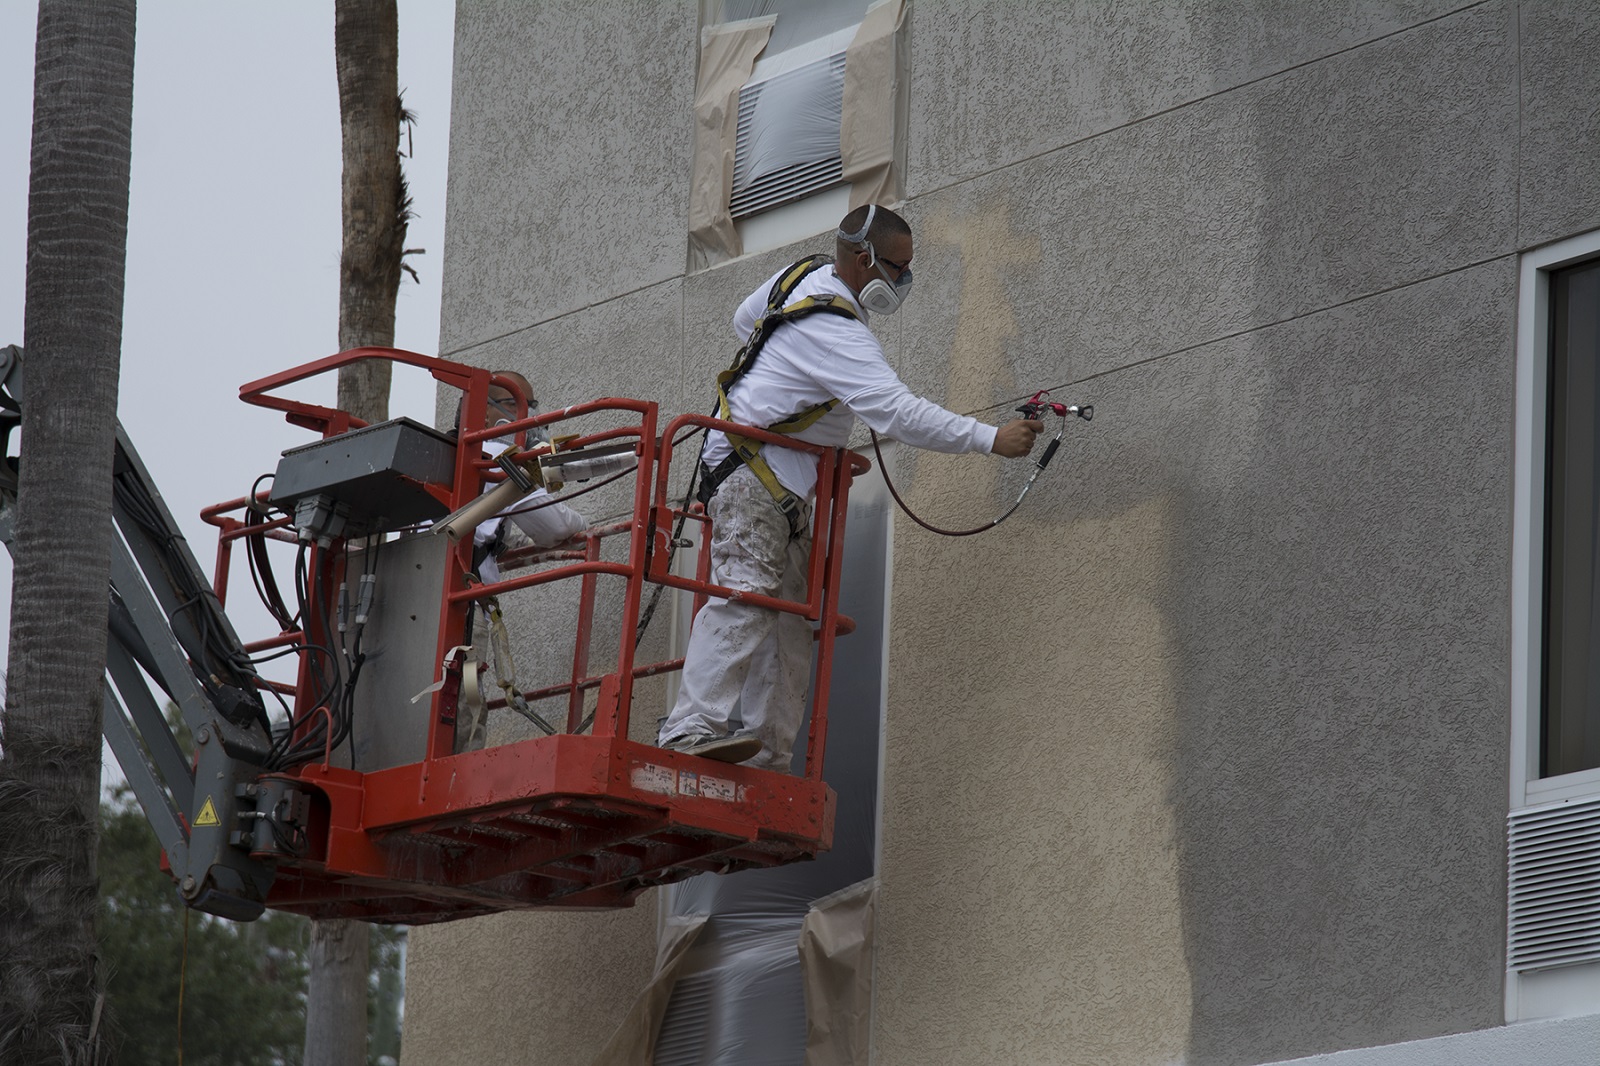 Titan RX-Apex commercial painting application